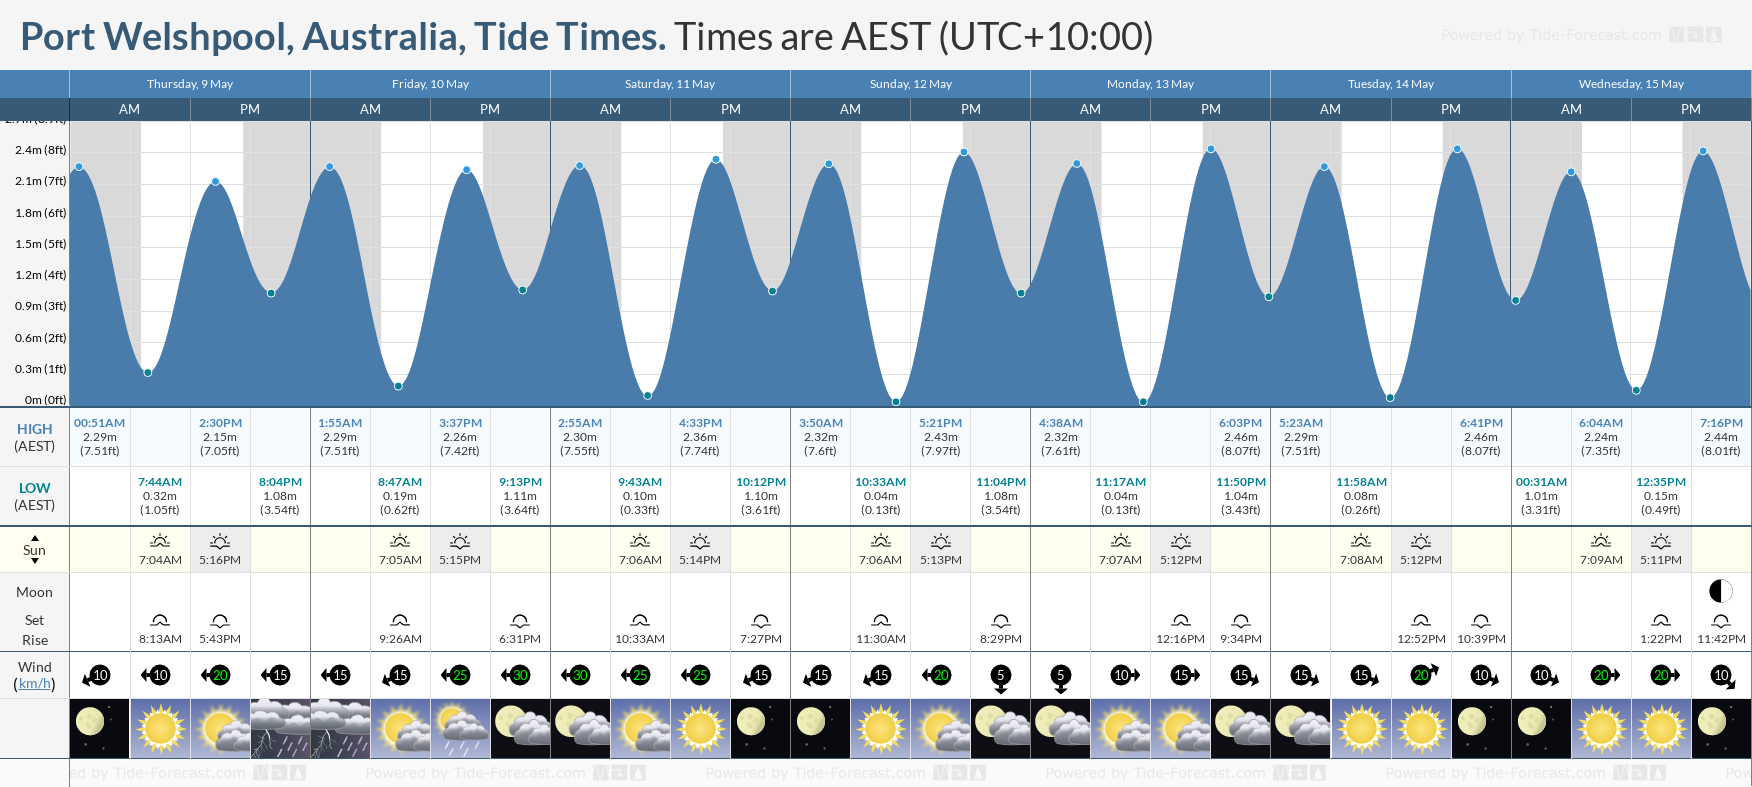 Port Welshpool, Australia Tide Chart including high and low tide tide times for the next 7 days